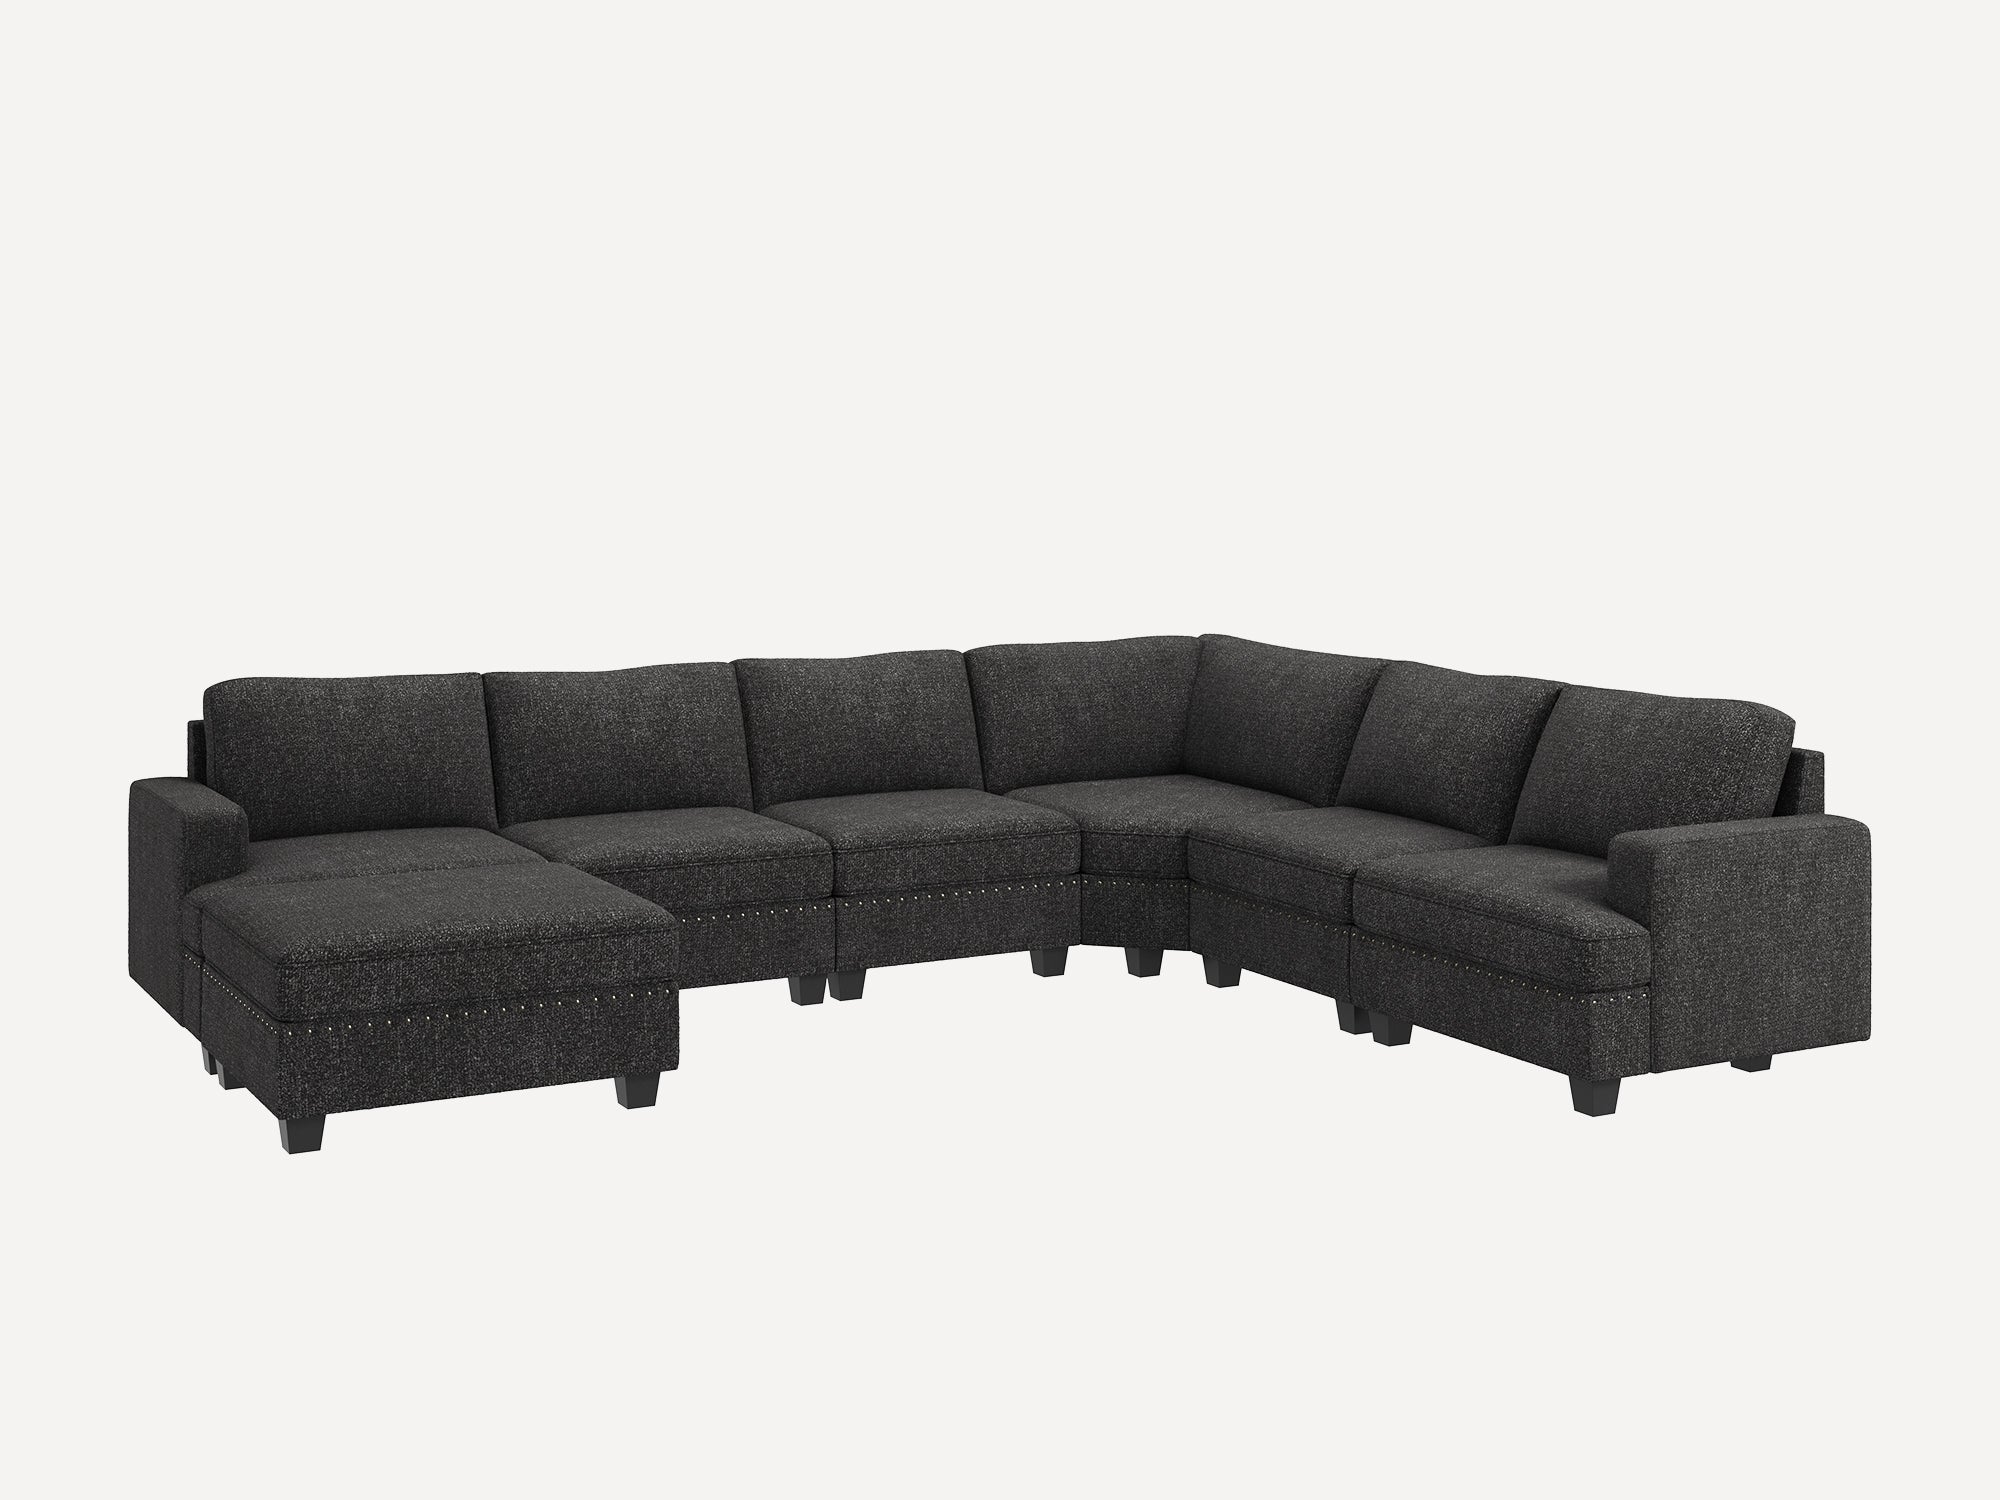 HONBAY 6-Seat Corner Modular Sofa Oversized Sectional Sofa Couch with Storage Reversible Ottoman #Color_Dark Grey